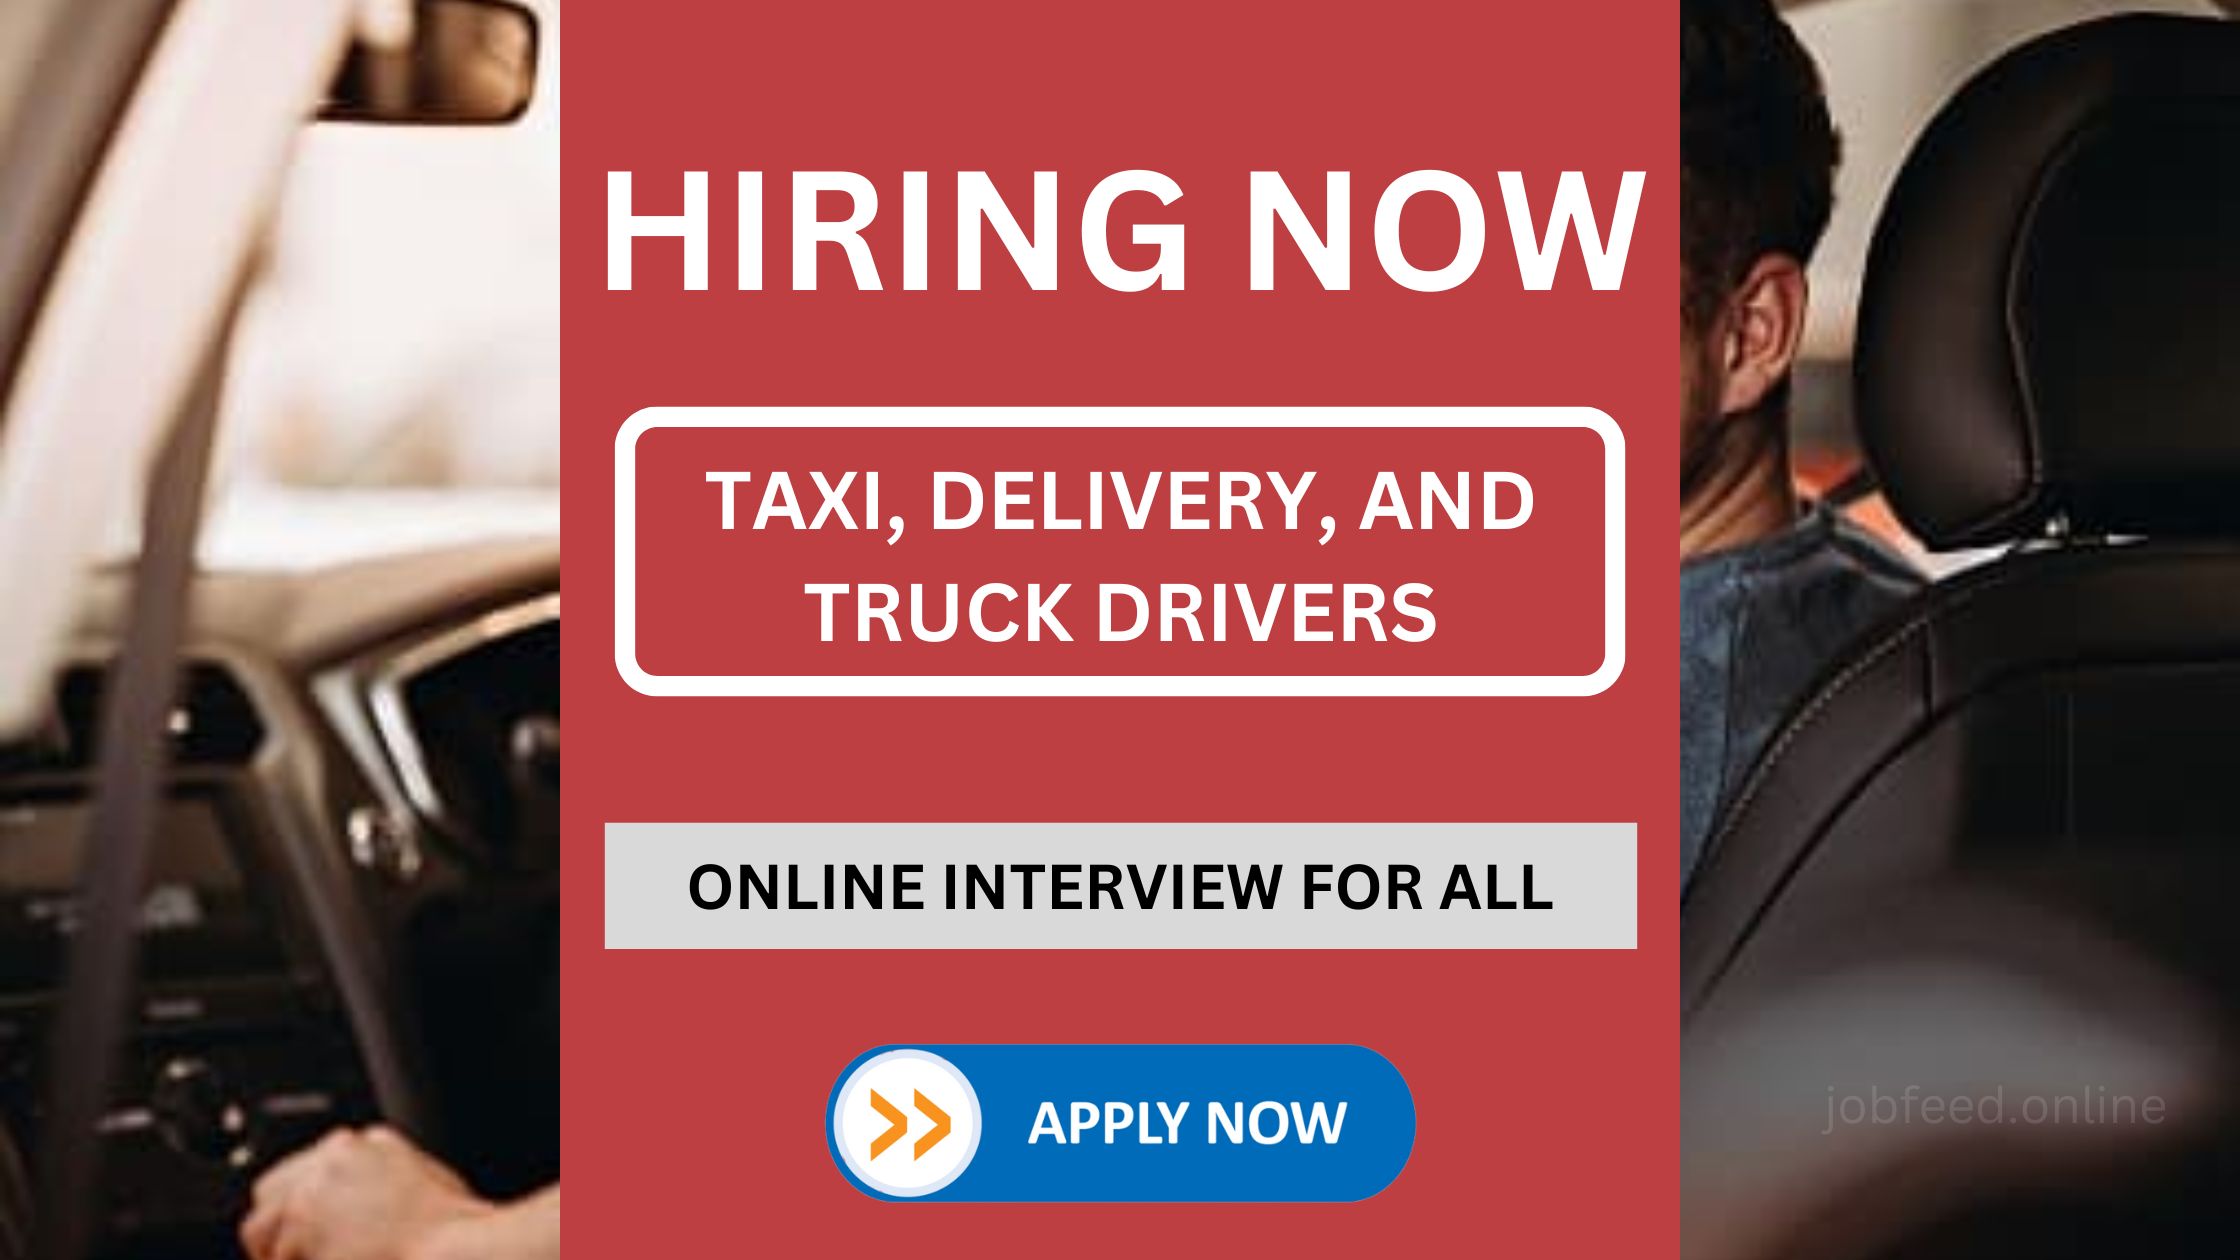 Online Interview - Taxi Drivers, Delivery Drivers, and Truck Drivers